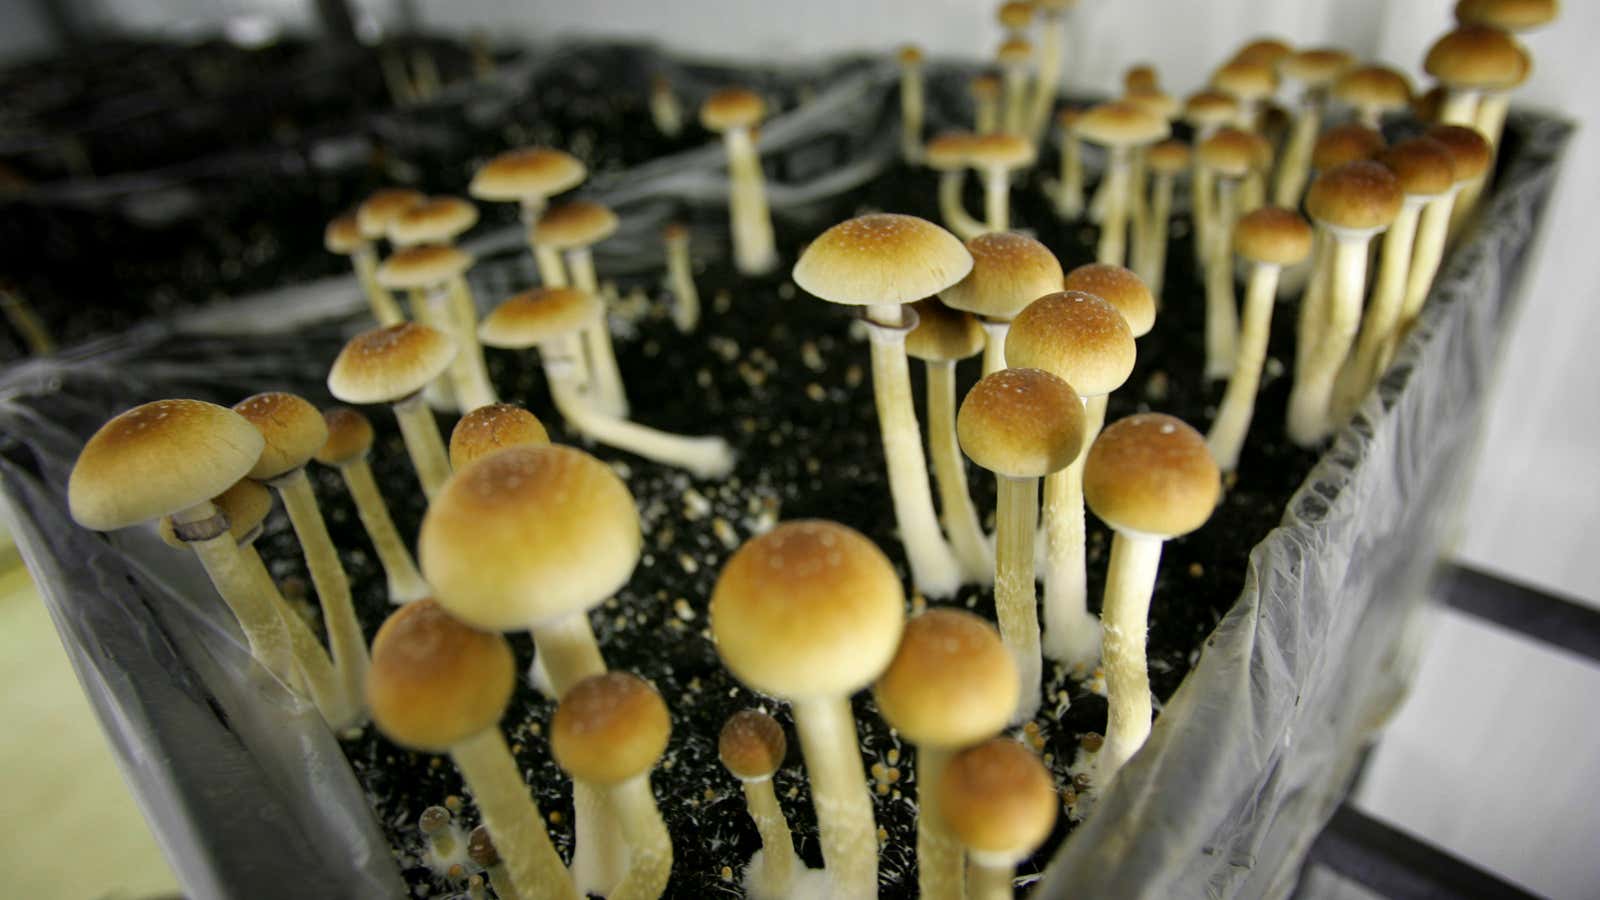 Canada has to consider whether magic mushrooms are a medical right